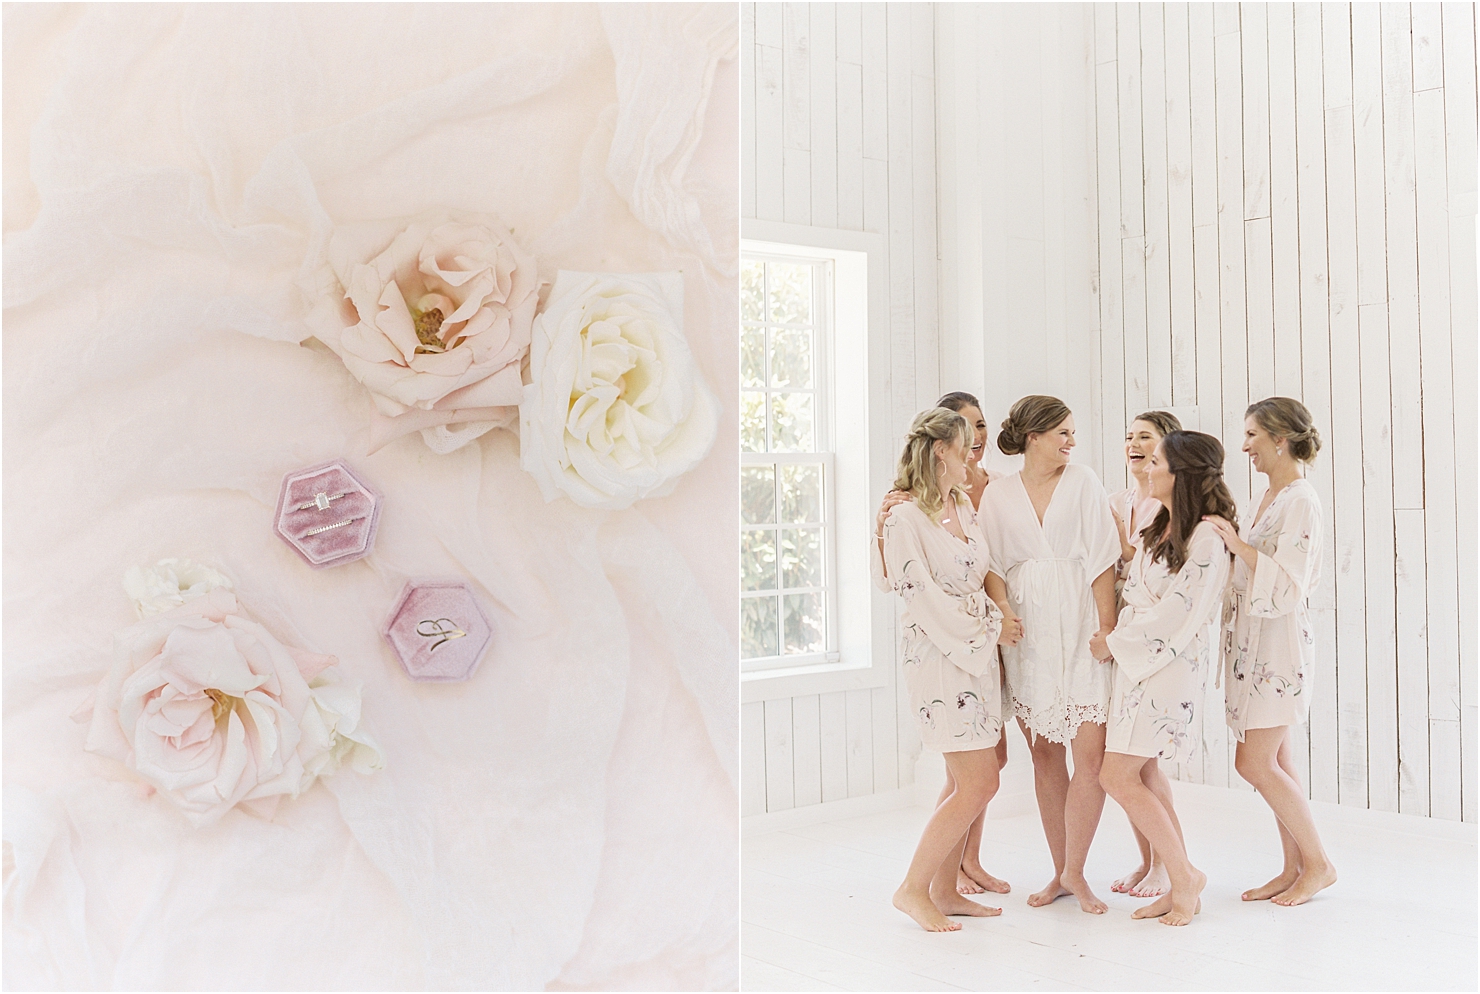 Getting Ready Bridal Suite Fine Art Wedding Photographer White Sparrow Barn Madeline Trent